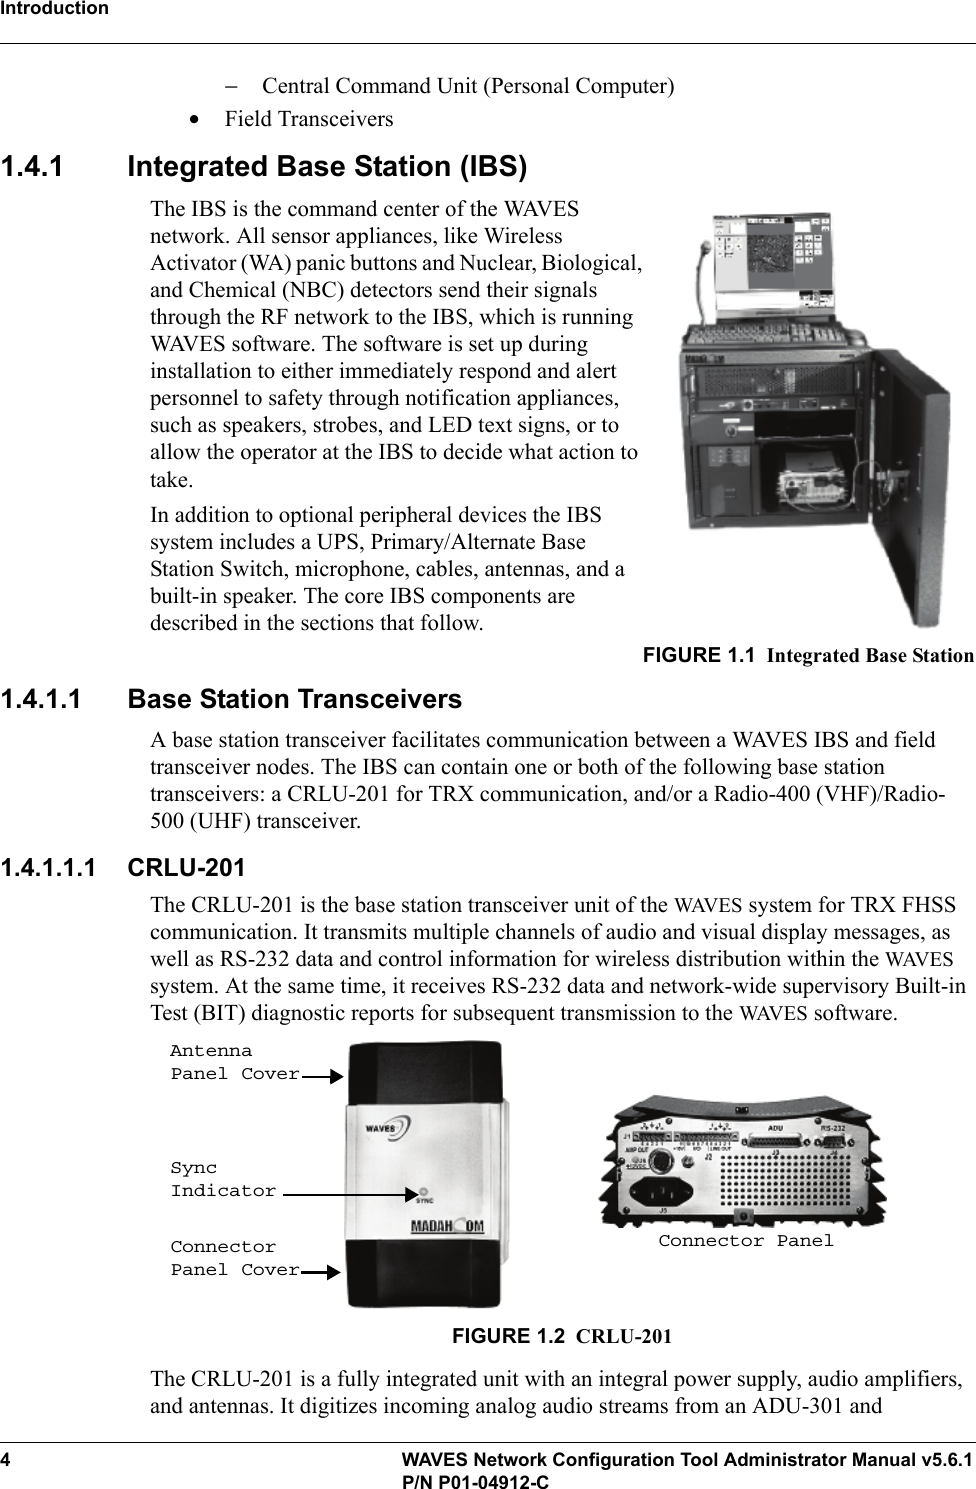 Introduction4 WAVES Network Configuration Tool Administrator Manual v5.6.1P/N P01-04912-C−Central Command Unit (Personal Computer)•Field Transceivers1.4.1 Integrated Base Station (IBS)The IBS is the command center of the WAVES network. All sensor appliances, like Wireless Activator (WA) panic buttons and Nuclear, Biological, and Chemical (NBC) detectors send their signals through the RF network to the IBS, which is running WAVES software. The software is set up during installation to either immediately respond and alert personnel to safety through notification appliances, such as speakers, strobes, and LED text signs, or to allow the operator at the IBS to decide what action to take.In addition to optional peripheral devices the IBS system includes a UPS, Primary/Alternate Base Station Switch, microphone, cables, antennas, and a built-in speaker. The core IBS components are described in the sections that follow.FIGURE 1.1 Integrated Base Station1.4.1.1 Base Station TransceiversA base station transceiver facilitates communication between a WAVES IBS and field transceiver nodes. The IBS can contain one or both of the following base station transceivers: a CRLU-201 for TRX communication, and/or a Radio-400 (VHF)/Radio-500 (UHF) transceiver.1.4.1.1.1 CRLU-201The CRLU-201 is the base station transceiver unit of the WAV E S  system for TRX FHSS communication. It transmits multiple channels of audio and visual display messages, as well as RS-232 data and control information for wireless distribution within the WAVE S system. At the same time, it receives RS-232 data and network-wide supervisory Built-in Test (BIT) diagnostic reports for subsequent transmission to the WAVE S software.FIGURE 1.2 CRLU-201The CRLU-201 is a fully integrated unit with an integral power supply, audio amplifiers, and antennas. It digitizes incoming analog audio streams from an ADU-301 and Antenna Panel CoverSync IndicatorConnector Panel CoverConnector Panel